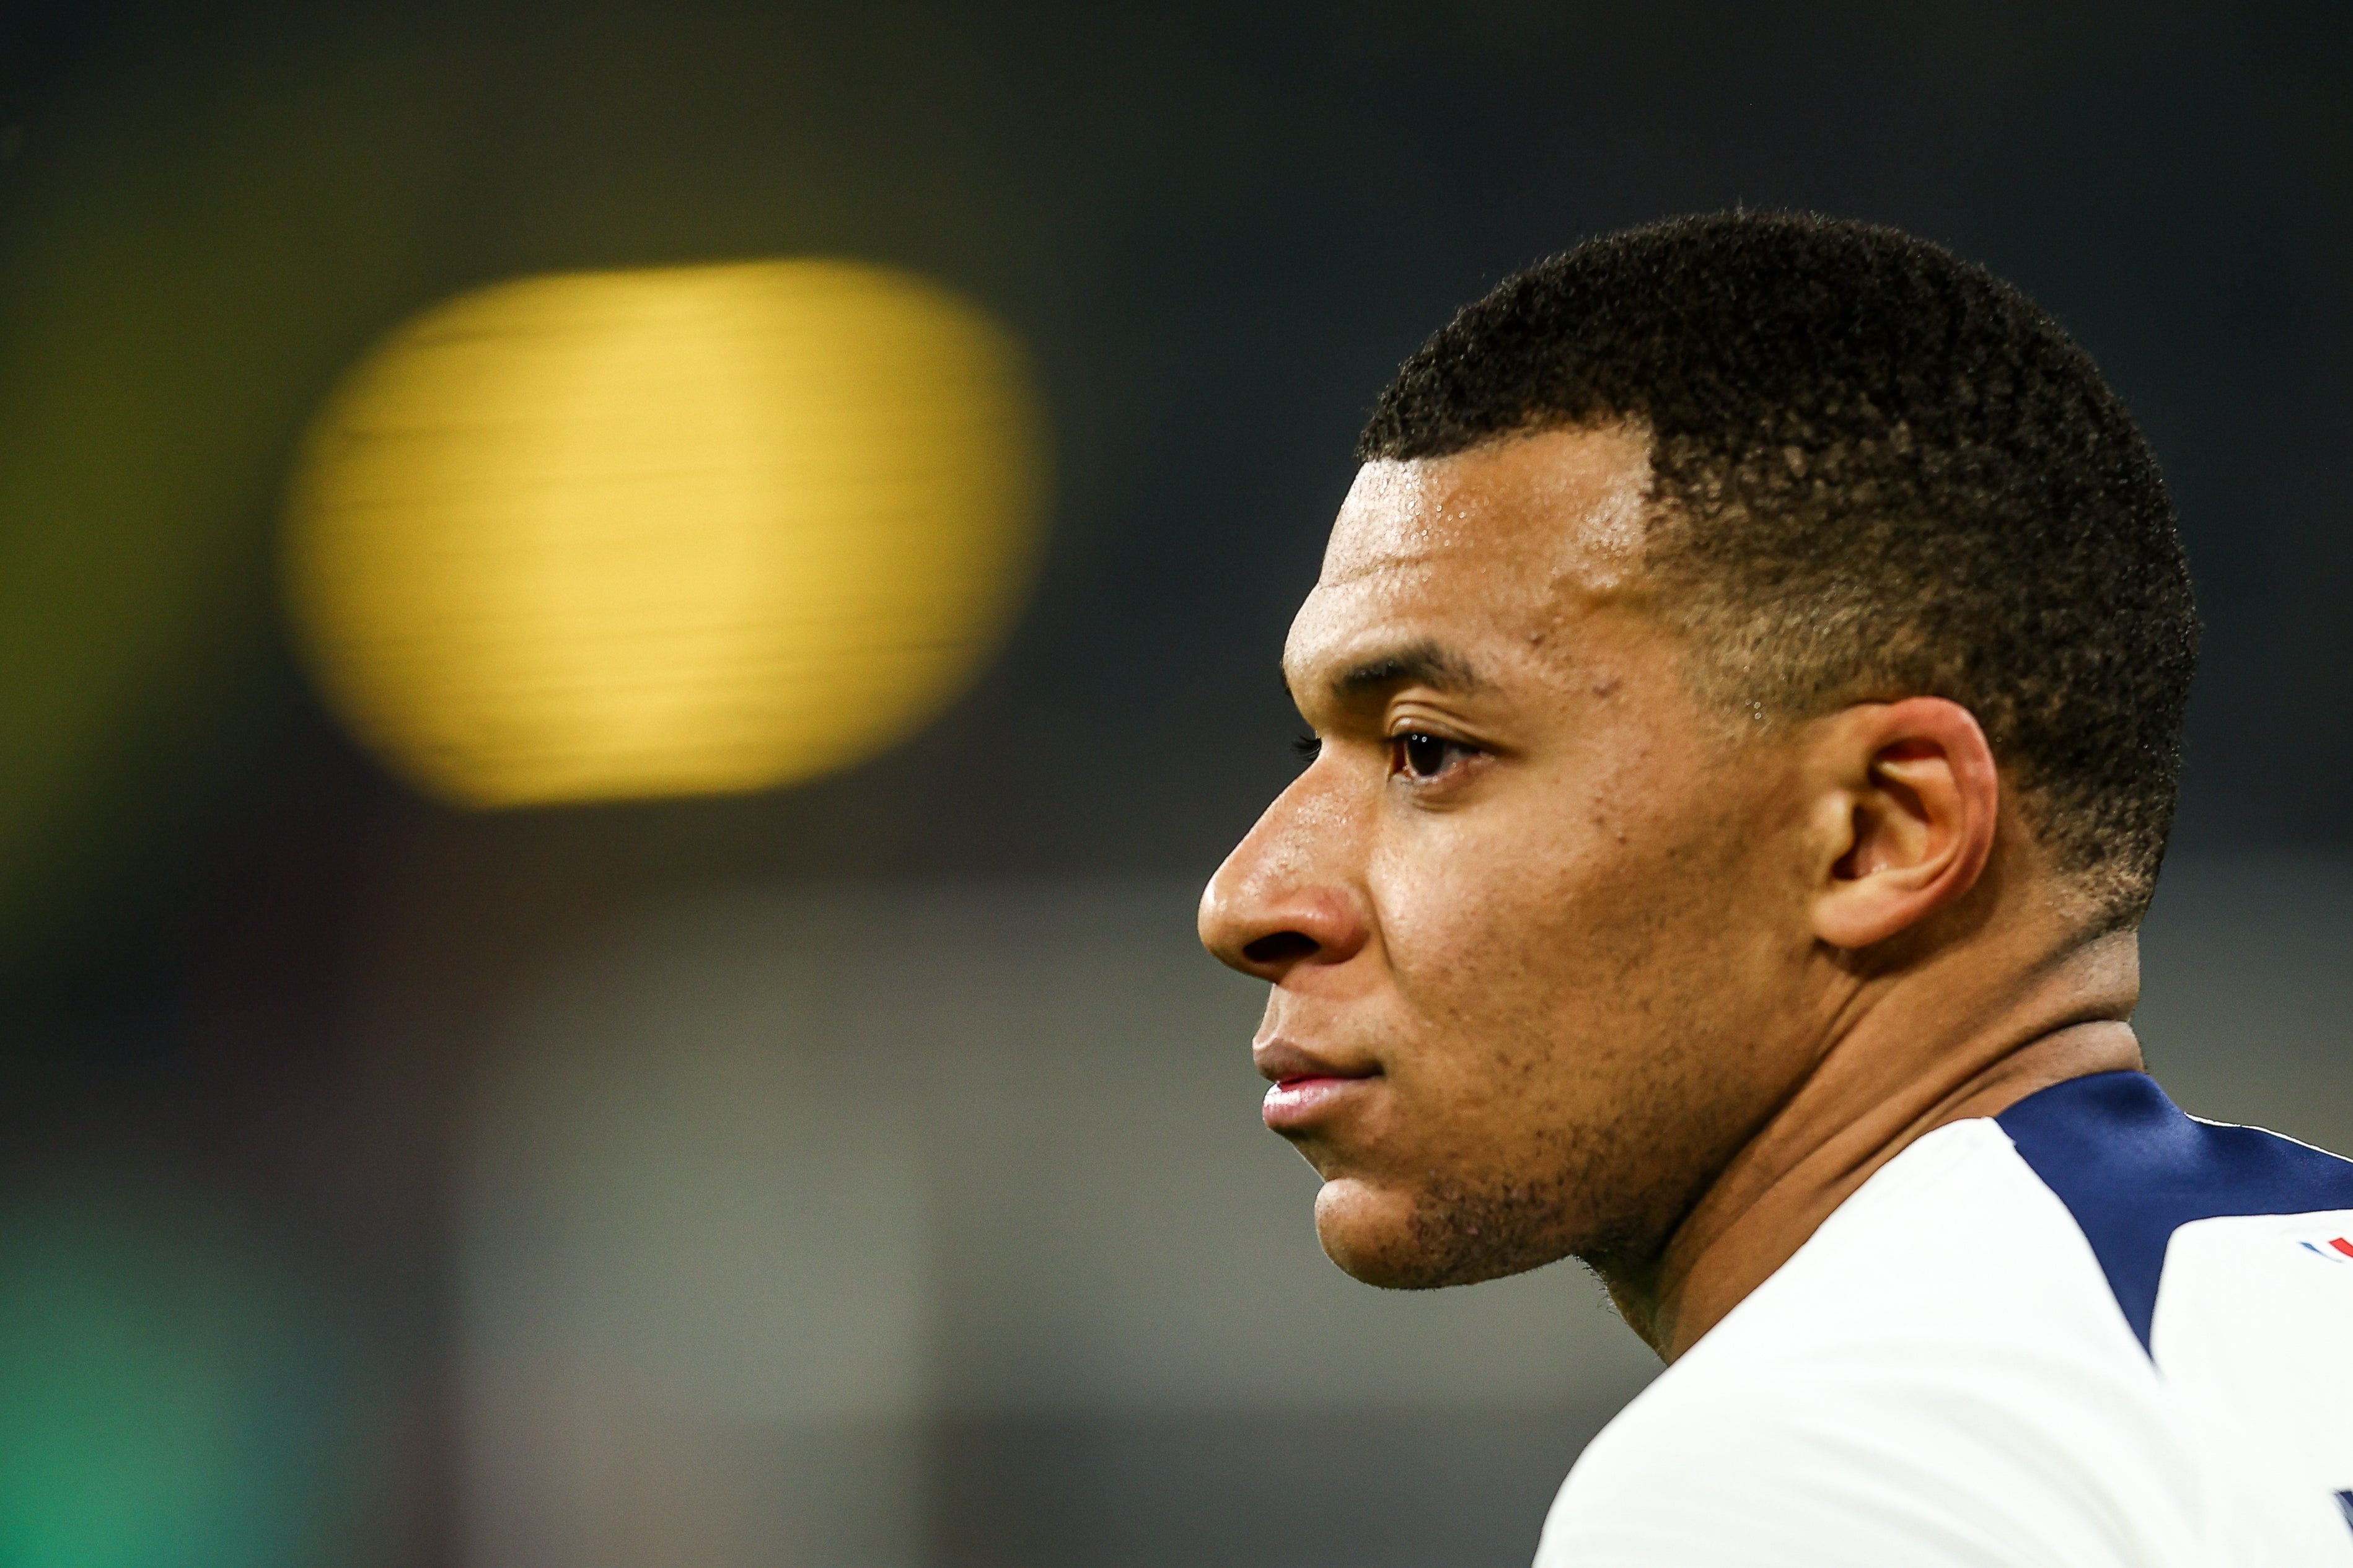 Kylian Mbappe’s future remains unclear